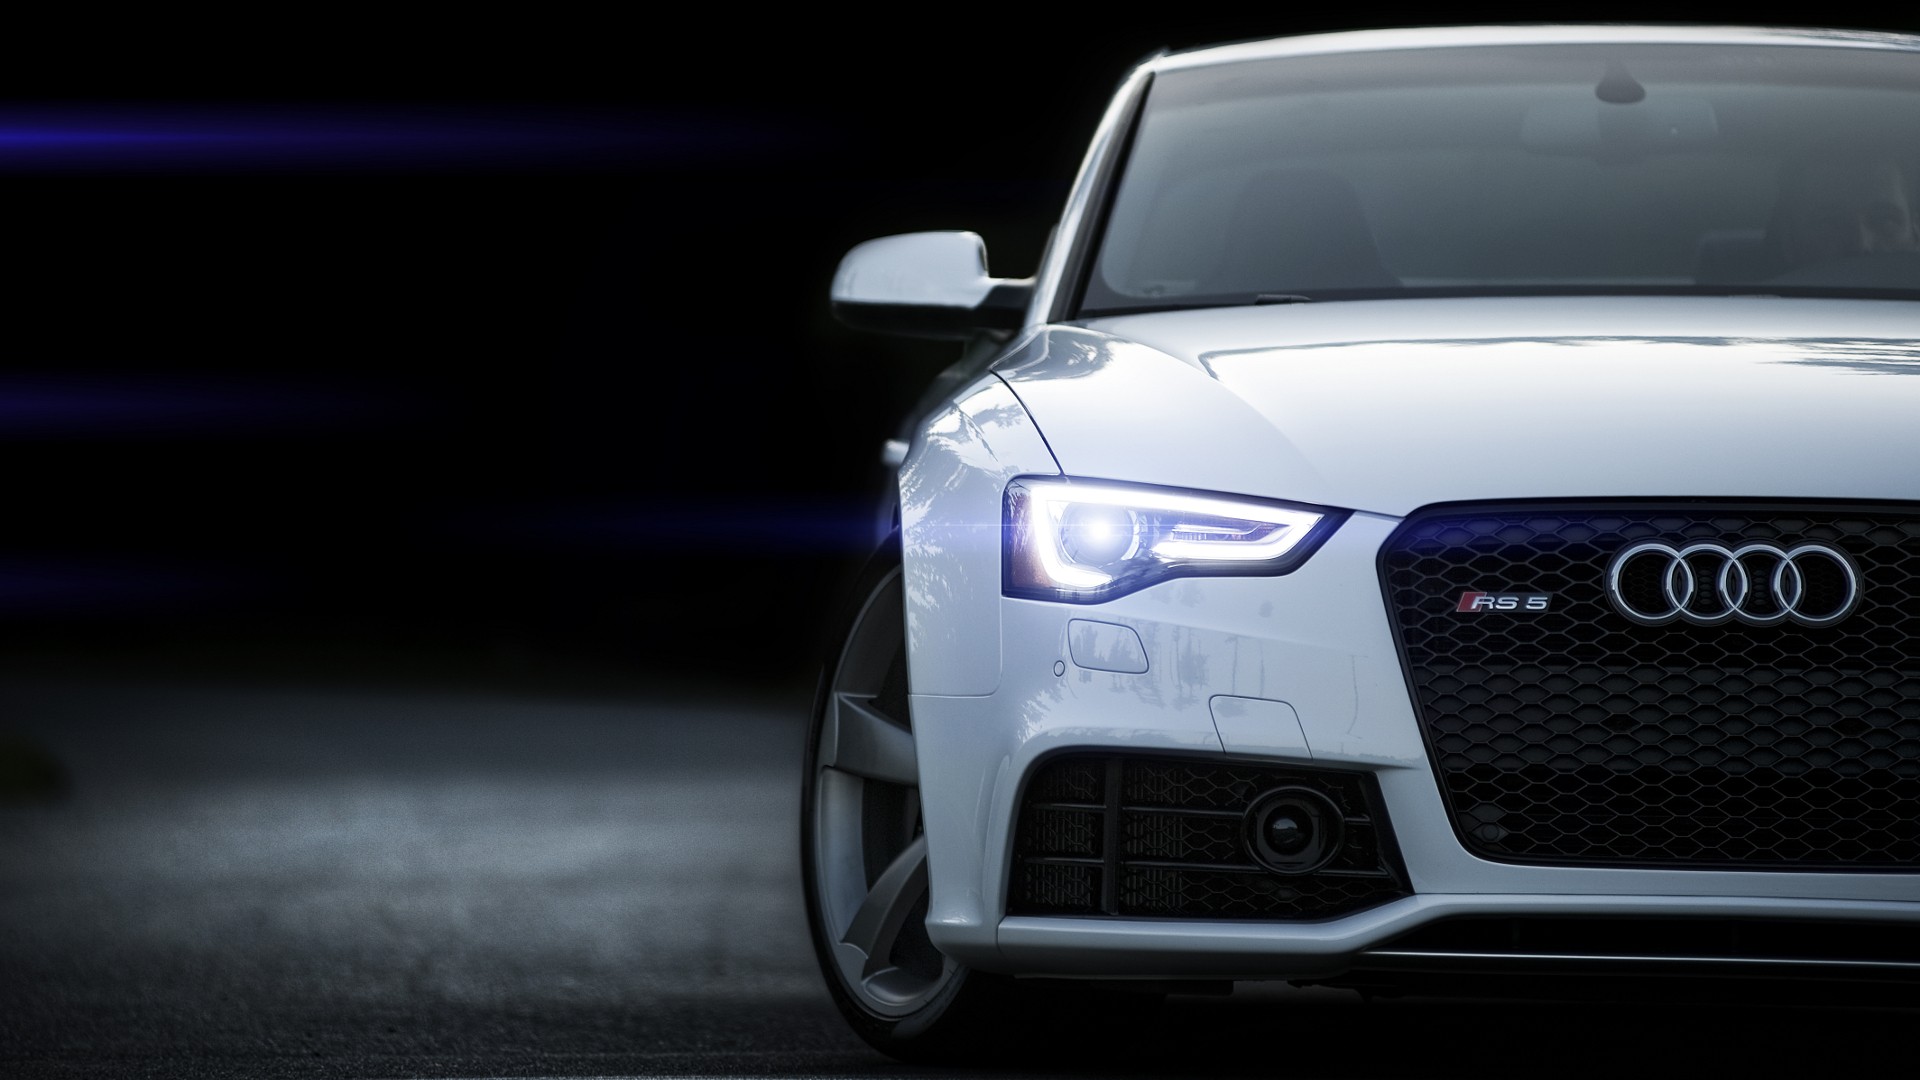 43 Audi WallpapersBackgrounds in HD For Free Download